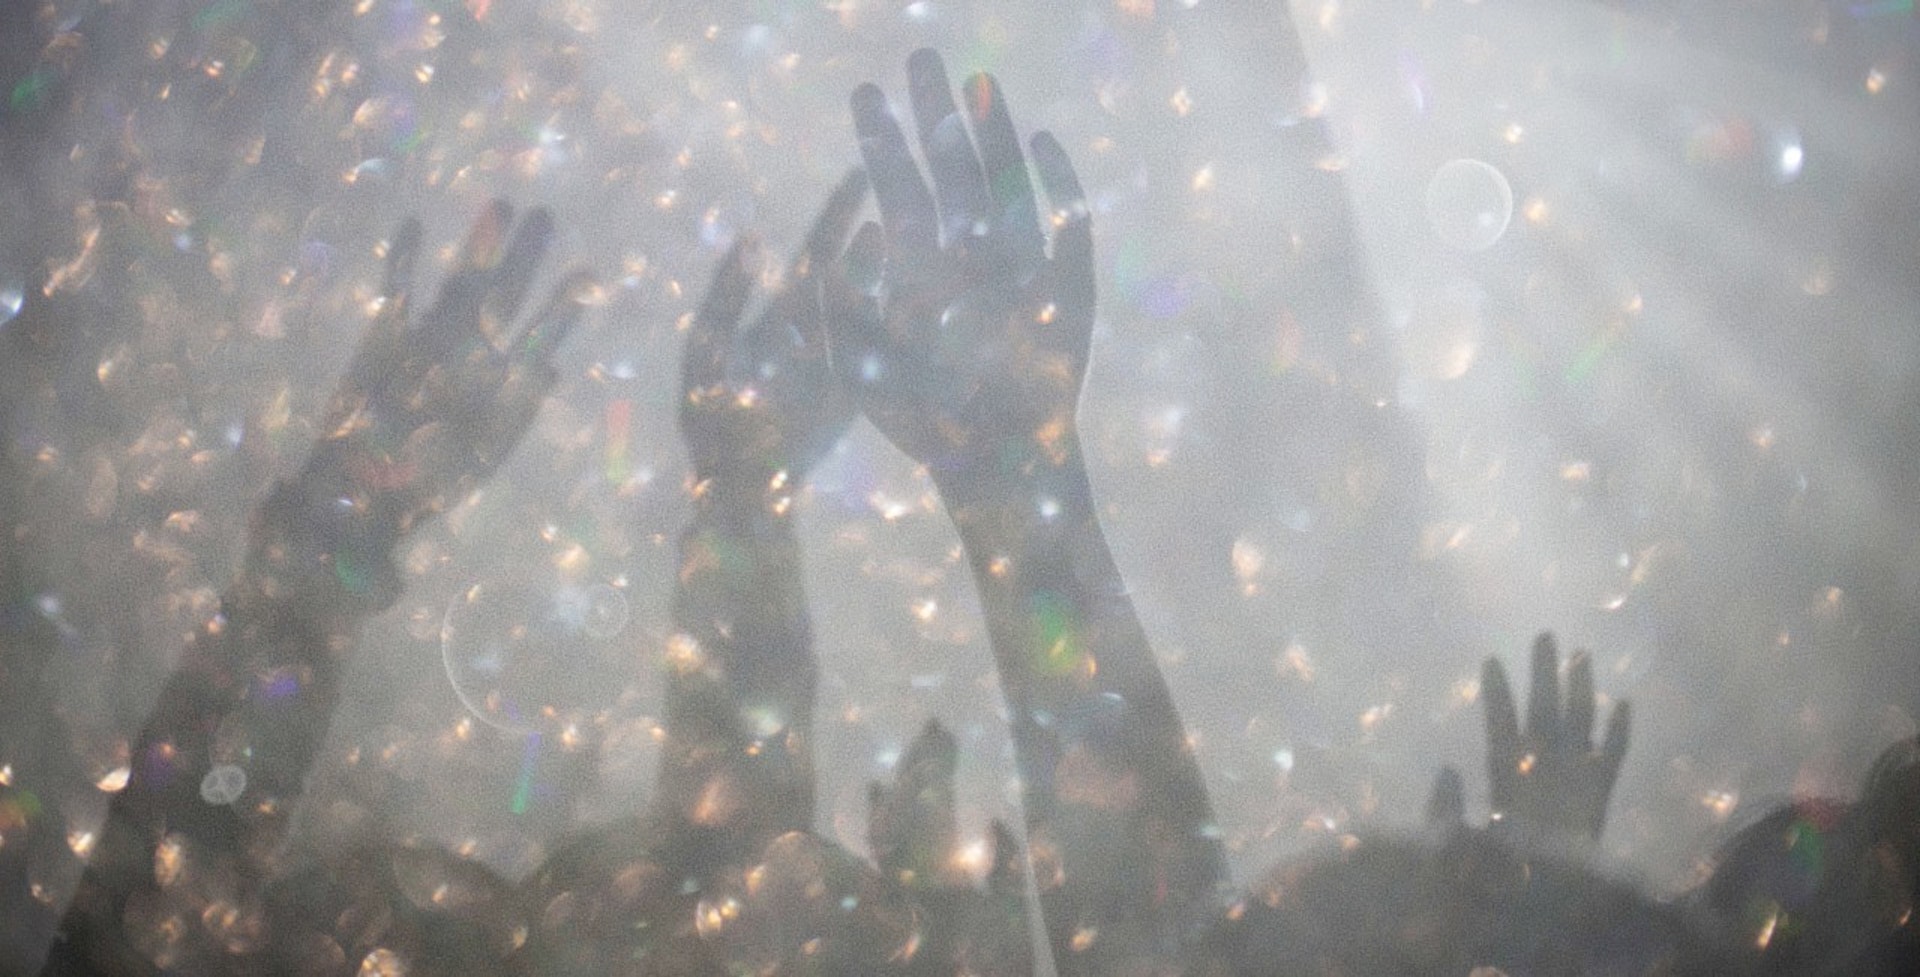 Higher planes: when rave culture and spiritualism collide